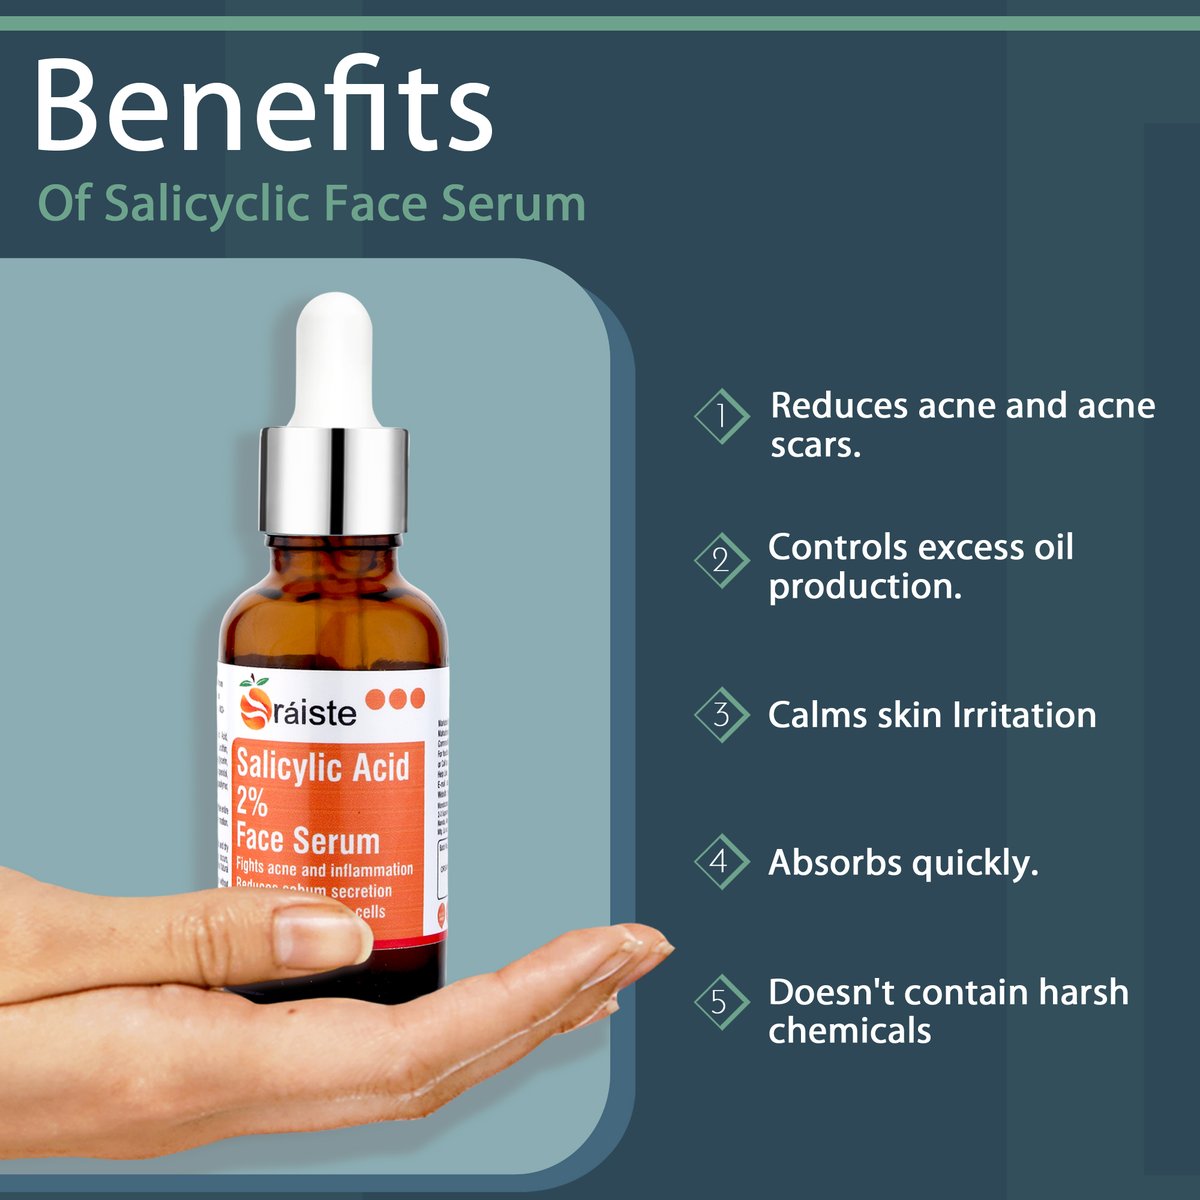 Say goodbye to stubborn acne and hello to clearer, smoother skin with Oraiste's Salicylic Acid 2% Face Serum!

Get yours today and see the difference for yourself!
📞Call- +919759699999

#Oraiste #SalicylicAcidSerum #ClearSkinGoals #RadiantComplexion #SkincareEssentials #Beauty